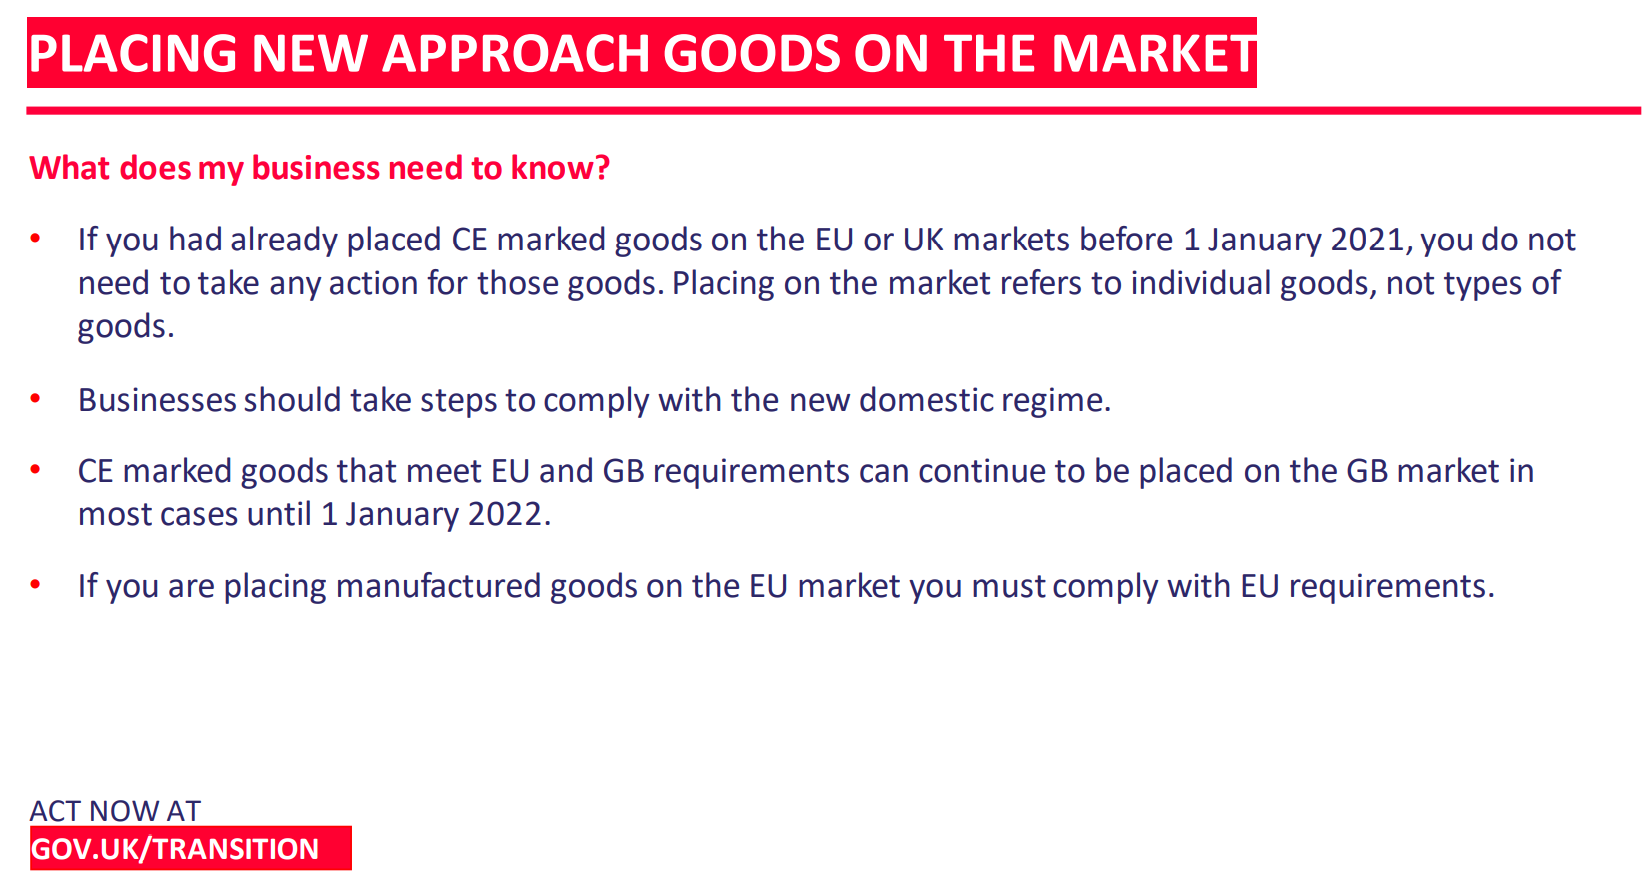 Brexit: Placing goods on the market 